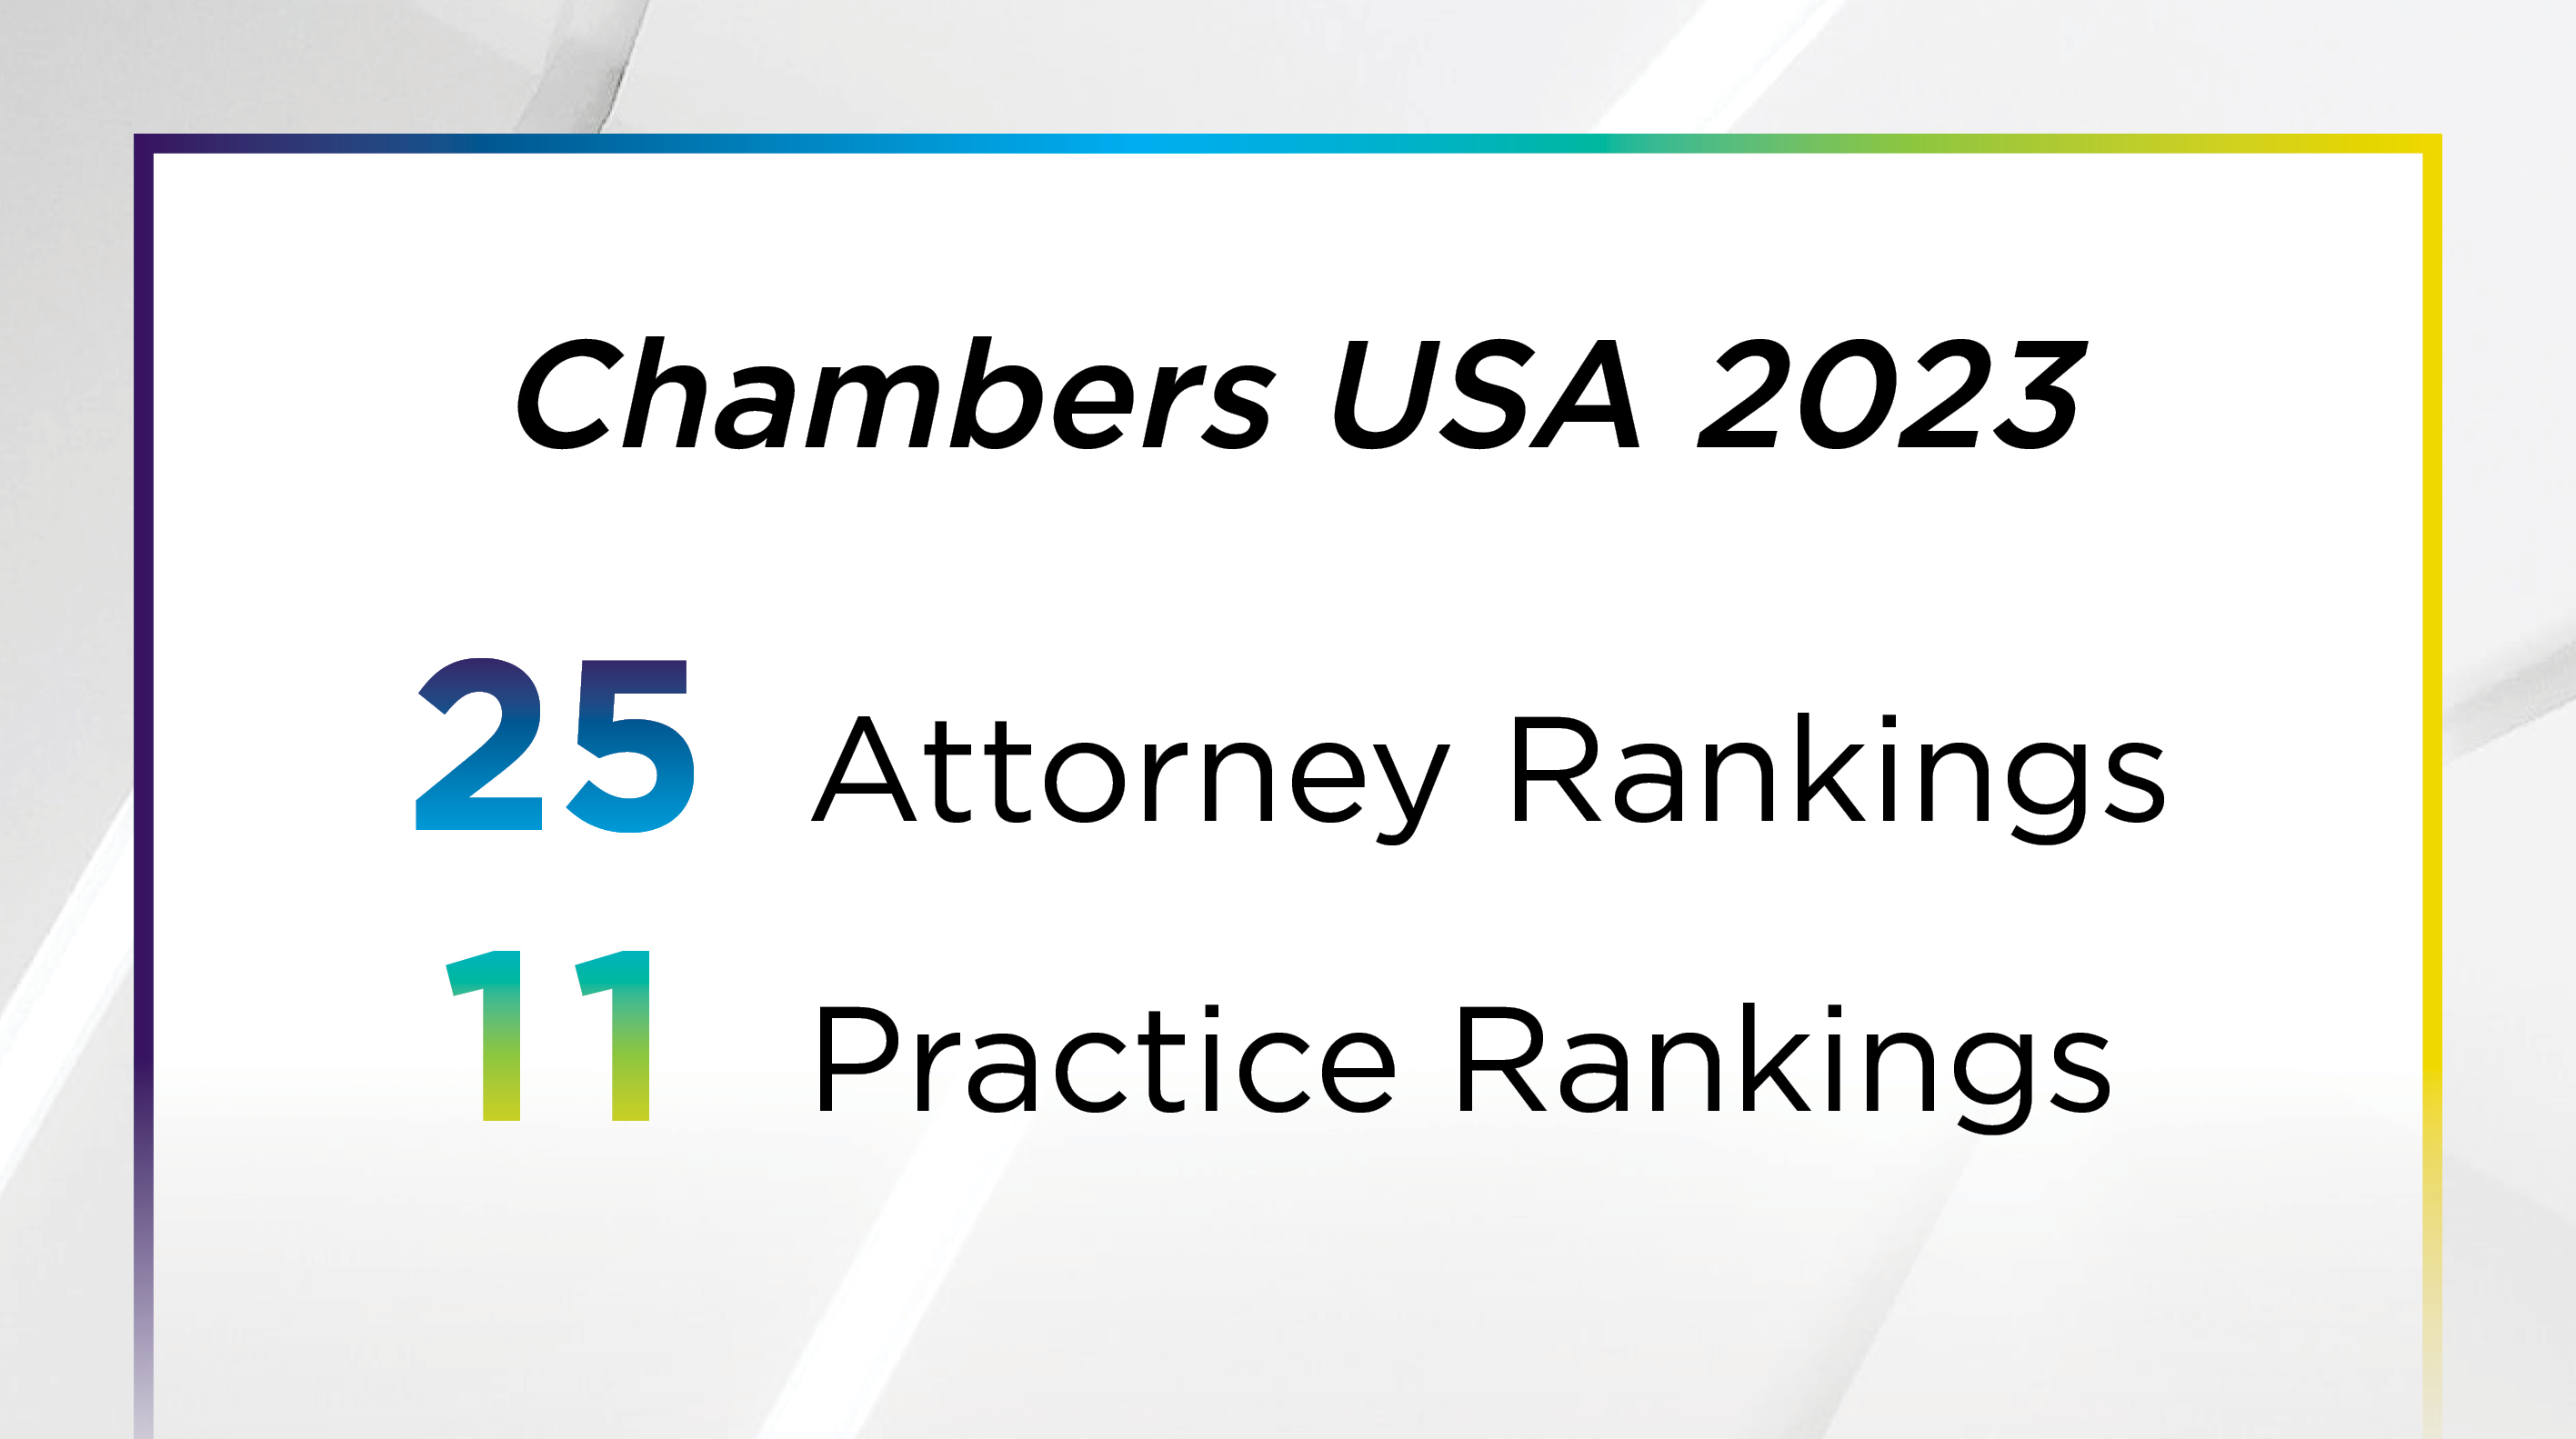 Michael Best Recognized in Chambers USA 2022 Photo